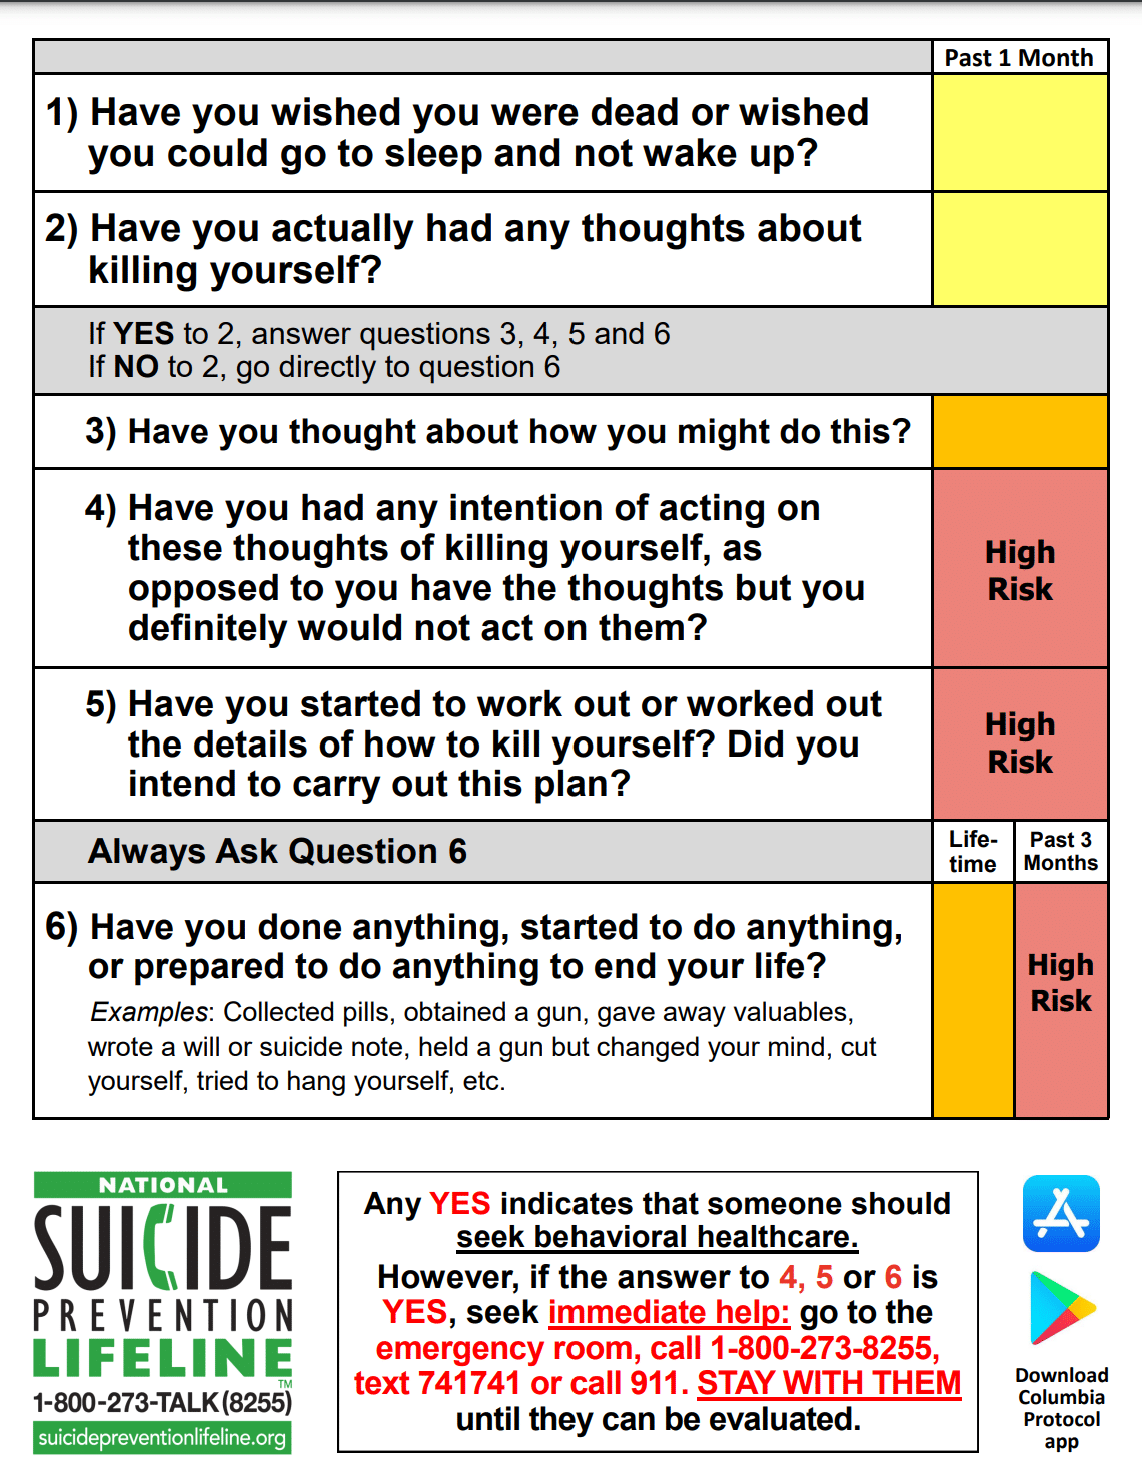 What happens if you kill yourself